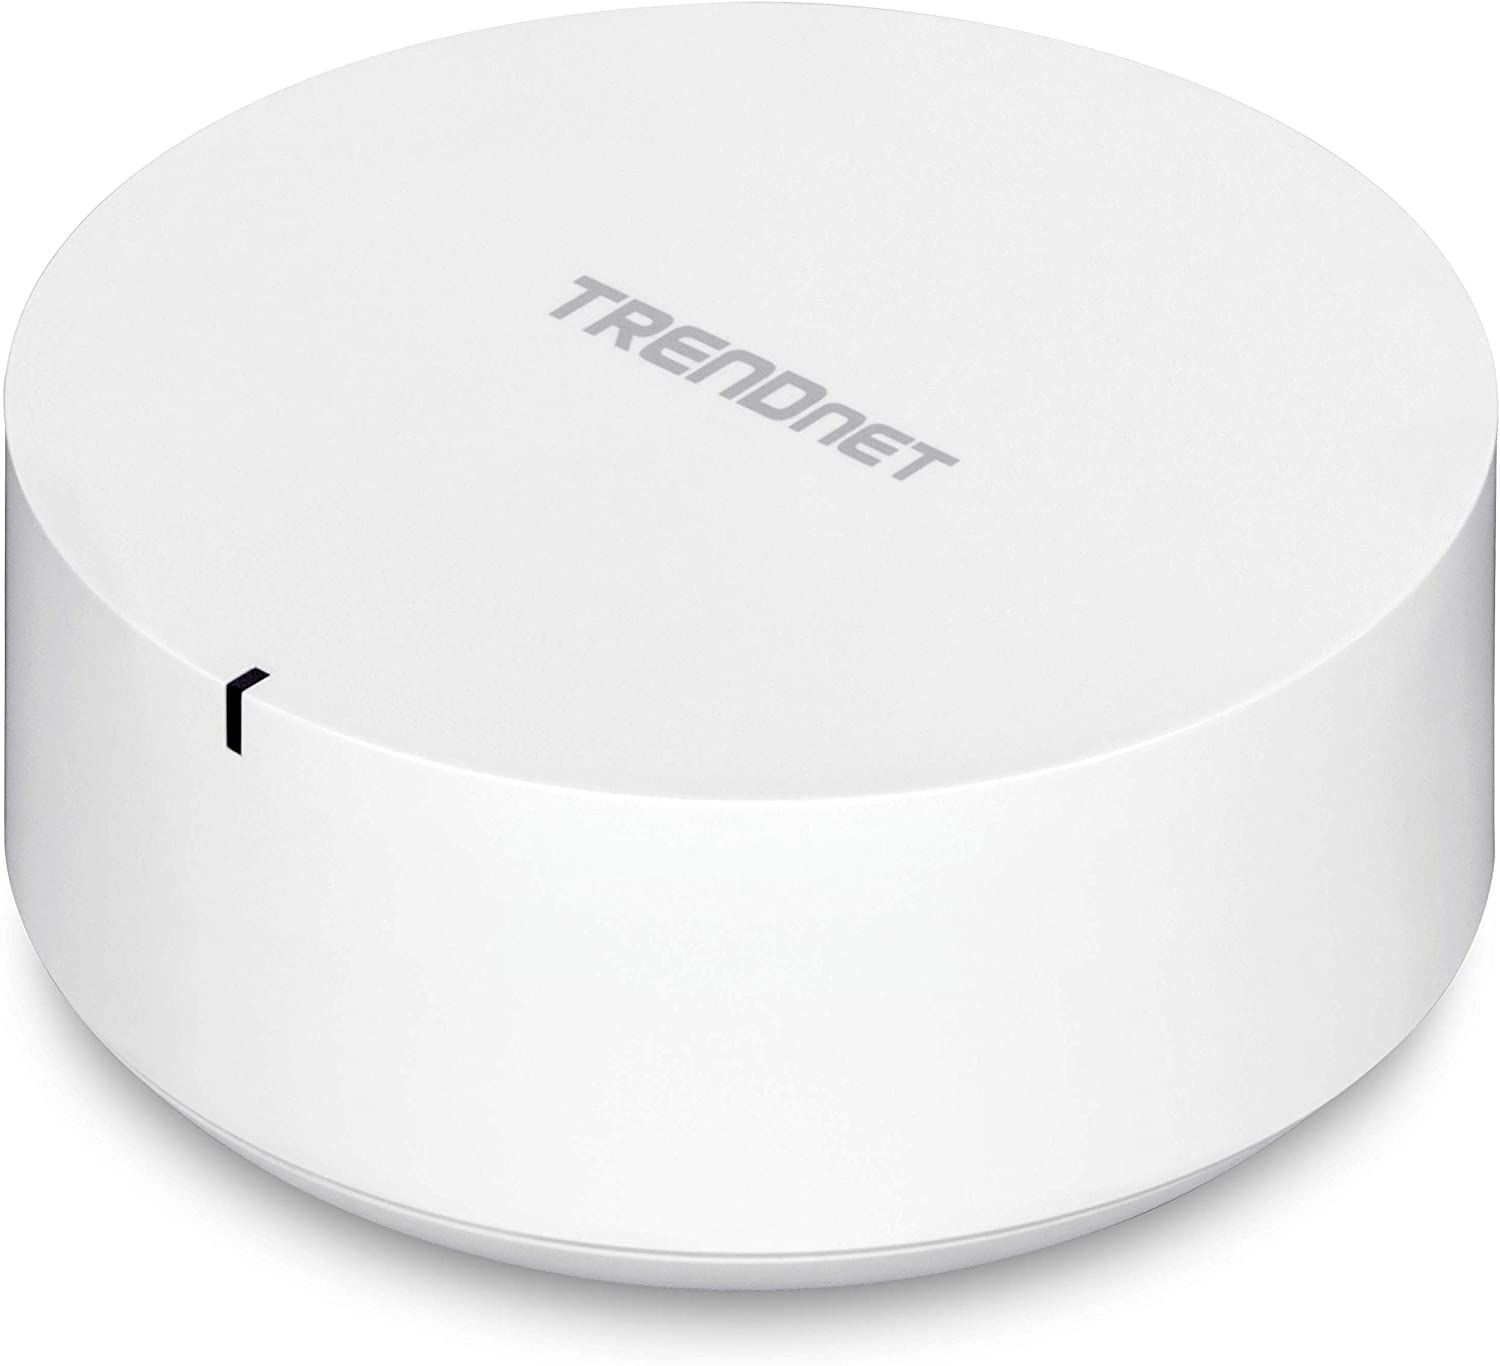 The 10 Best Mesh Wi-Fi Networks for Your Home